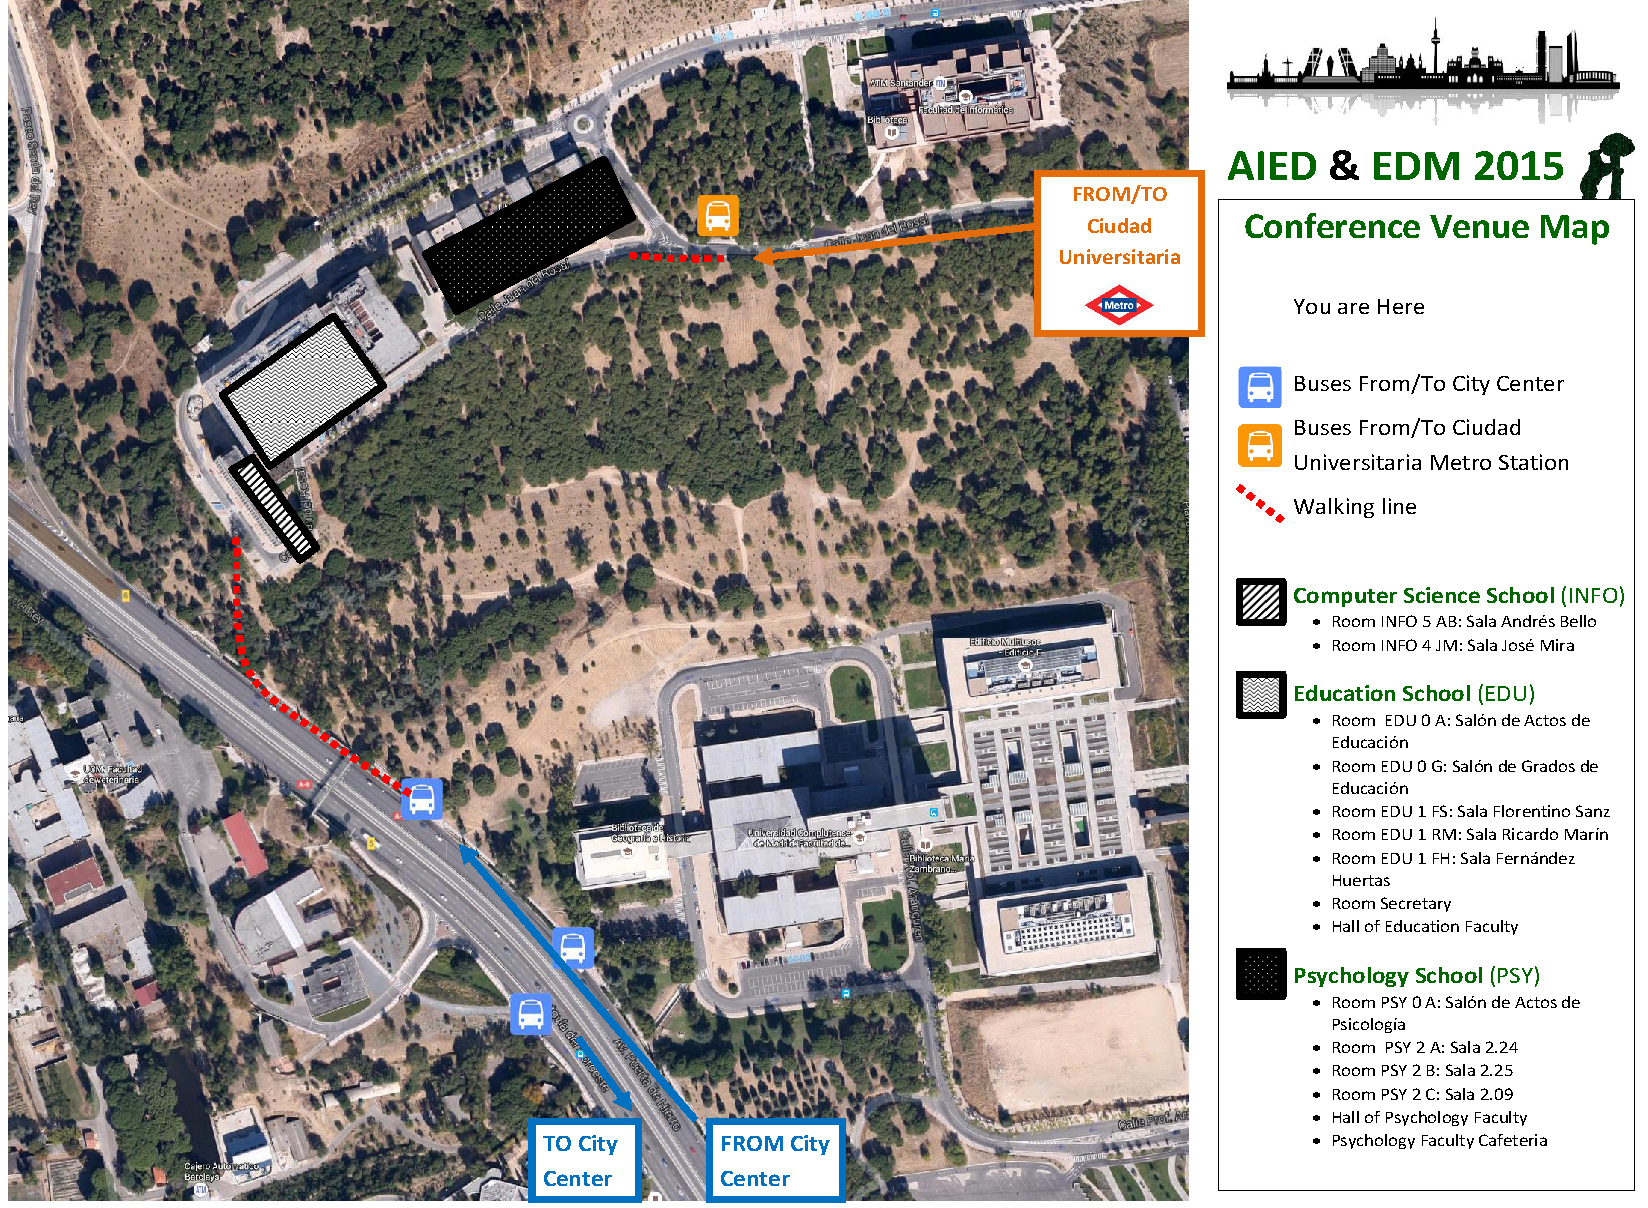 Conference venue map in Google maps